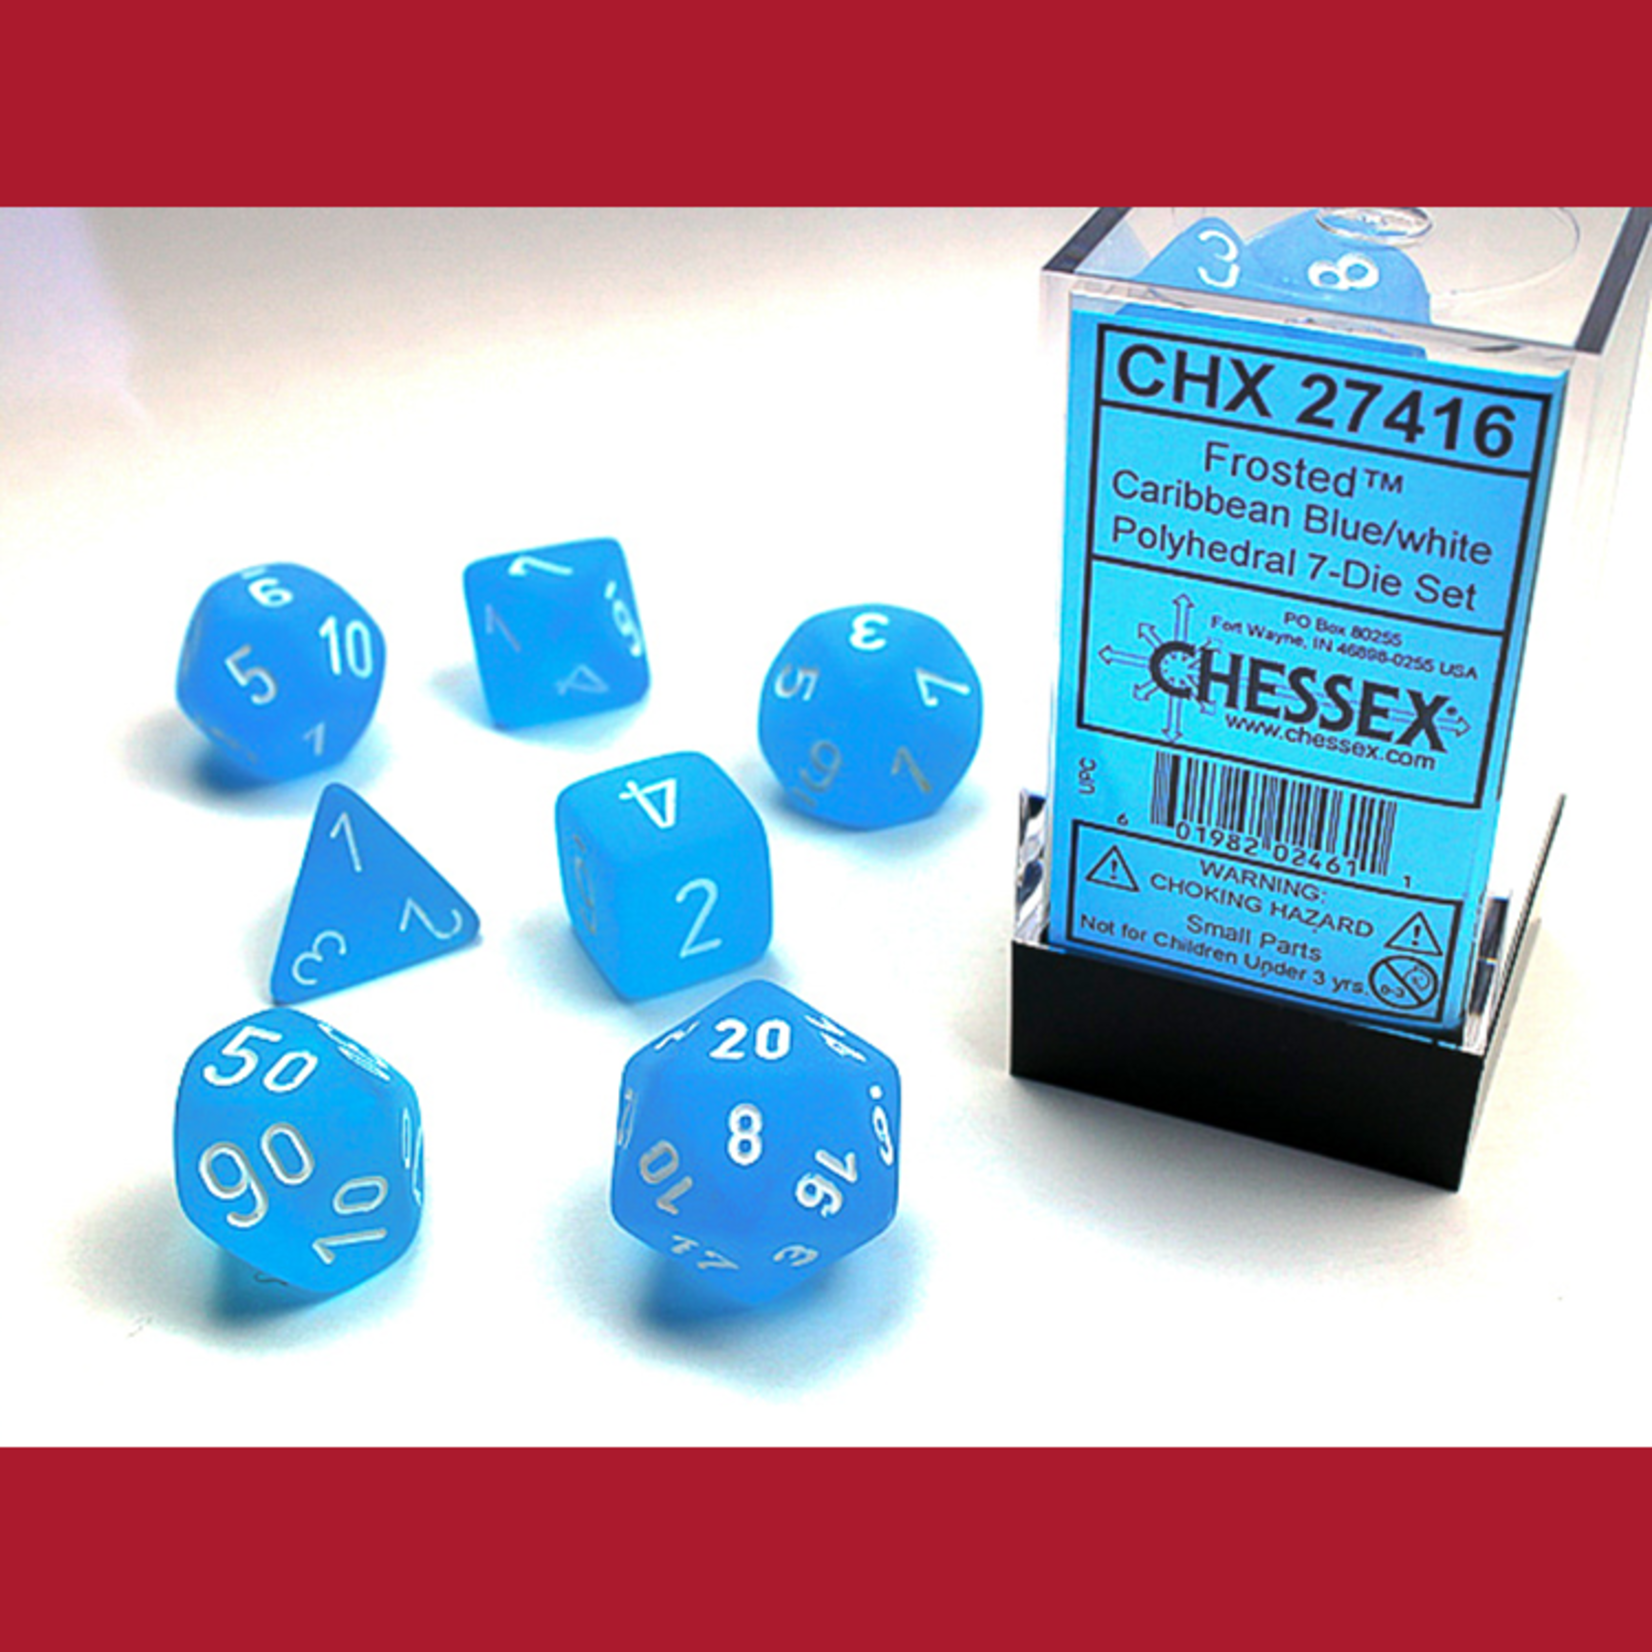 Chessex CHX 27416 Frosted Caribbean Blue Polyhedral 7-die Set